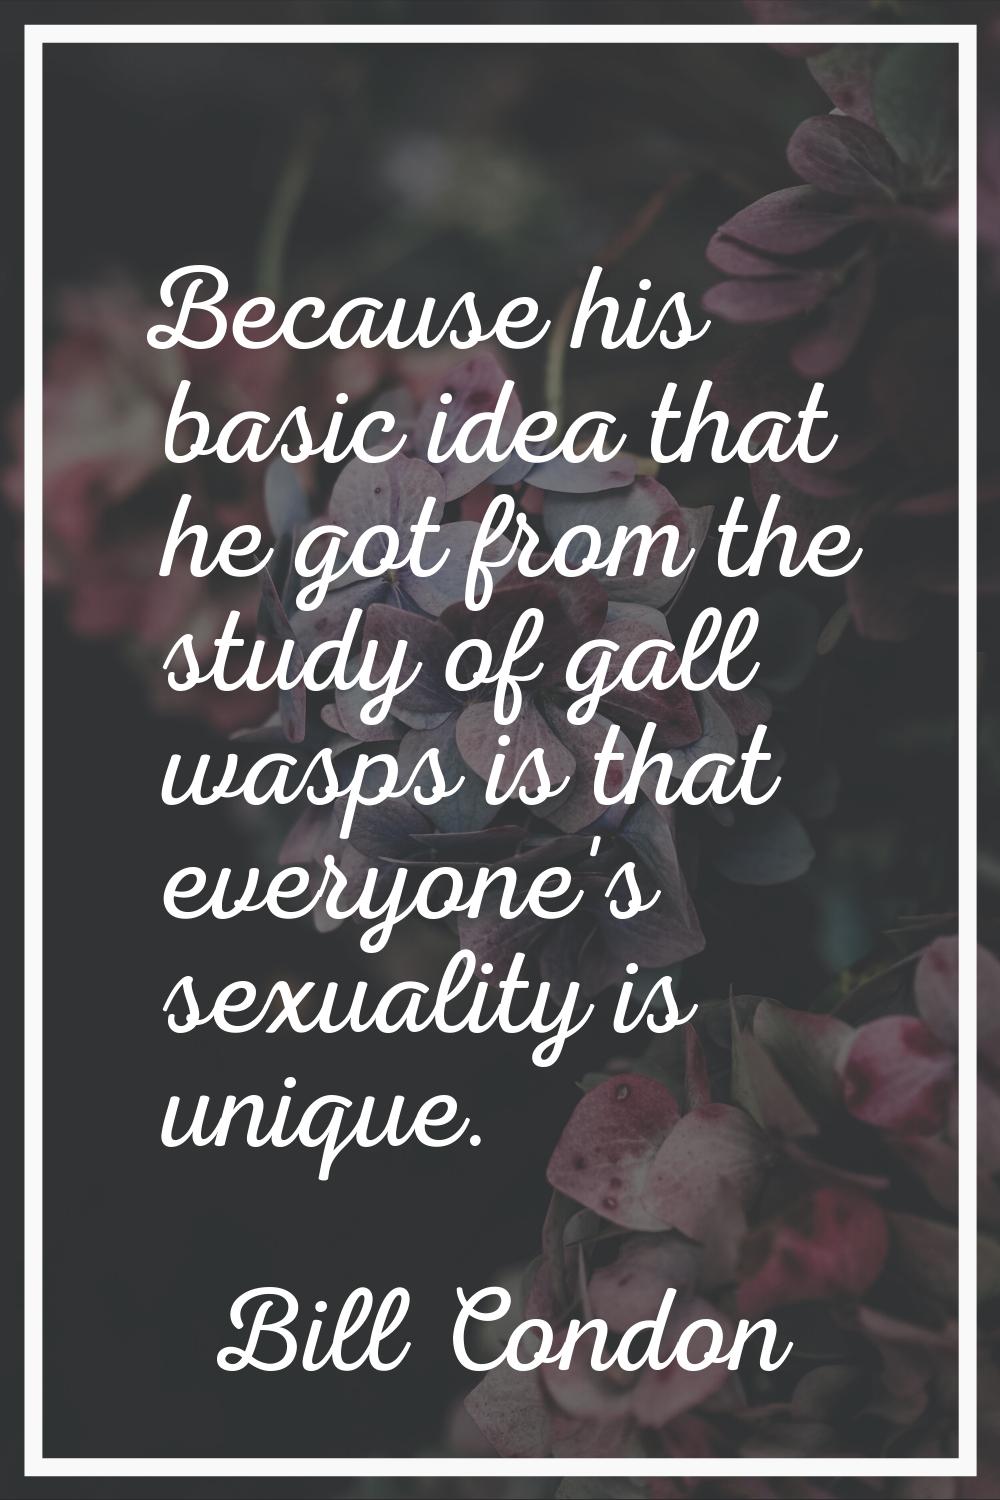 Because his basic idea that he got from the study of gall wasps is that everyone's sexuality is uni